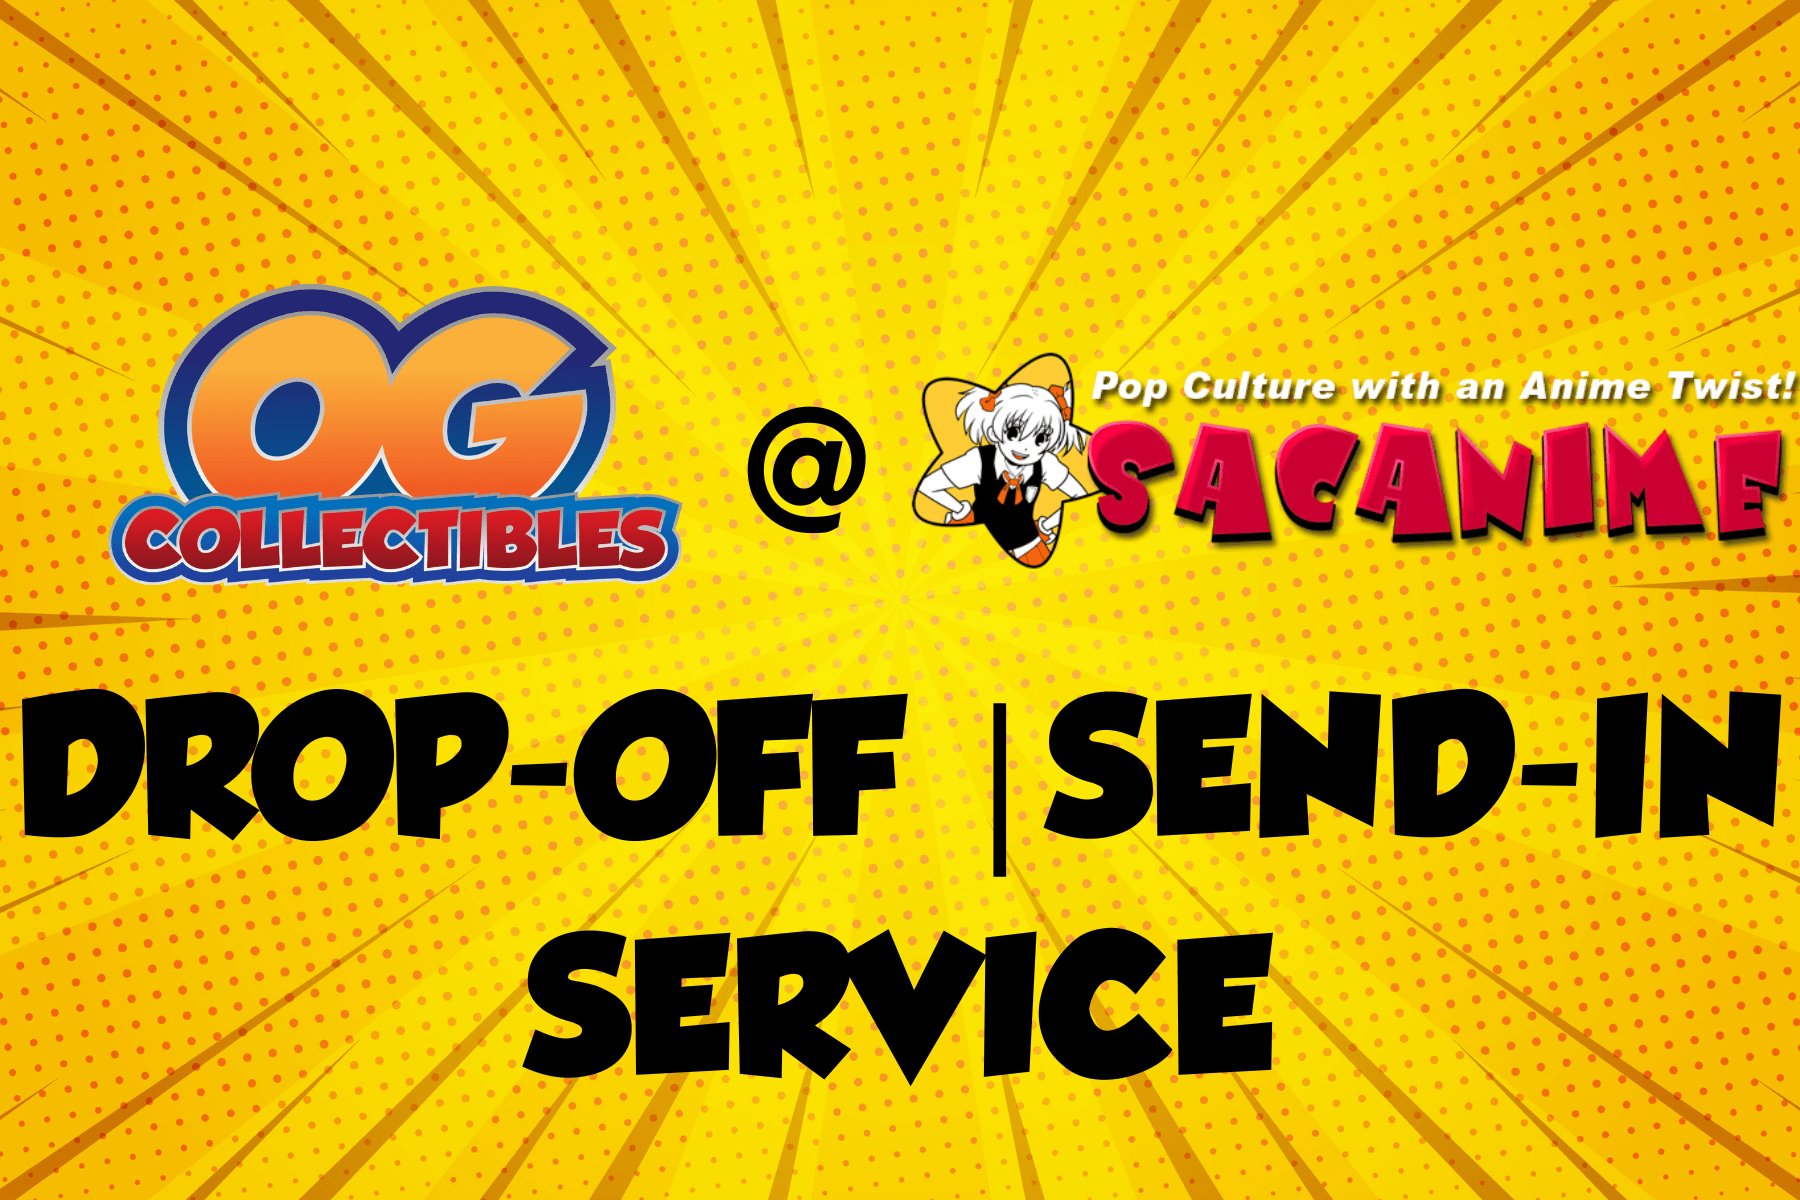 Sac Anime 2024 DropOff / SendIn Service Tickets at OG Collectibles in